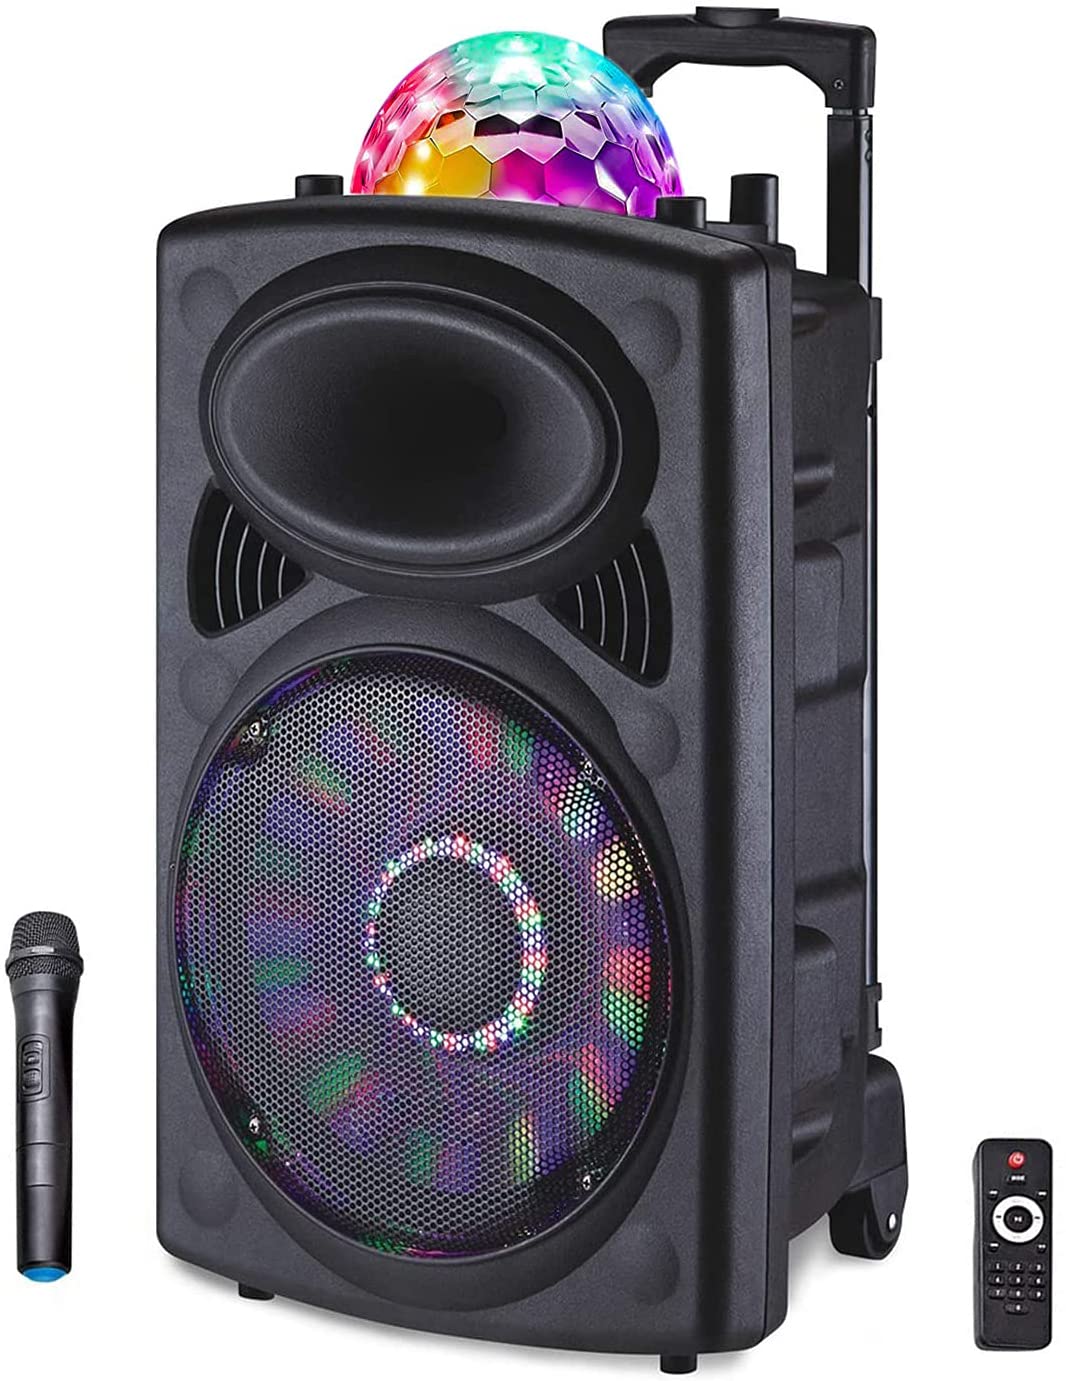 Impex TS 81 50W Multimedia Portable Trolley Speaker with 12"Speaker Mic LED Light USD/TF/AUX/FM Radio/Bluetooth Support